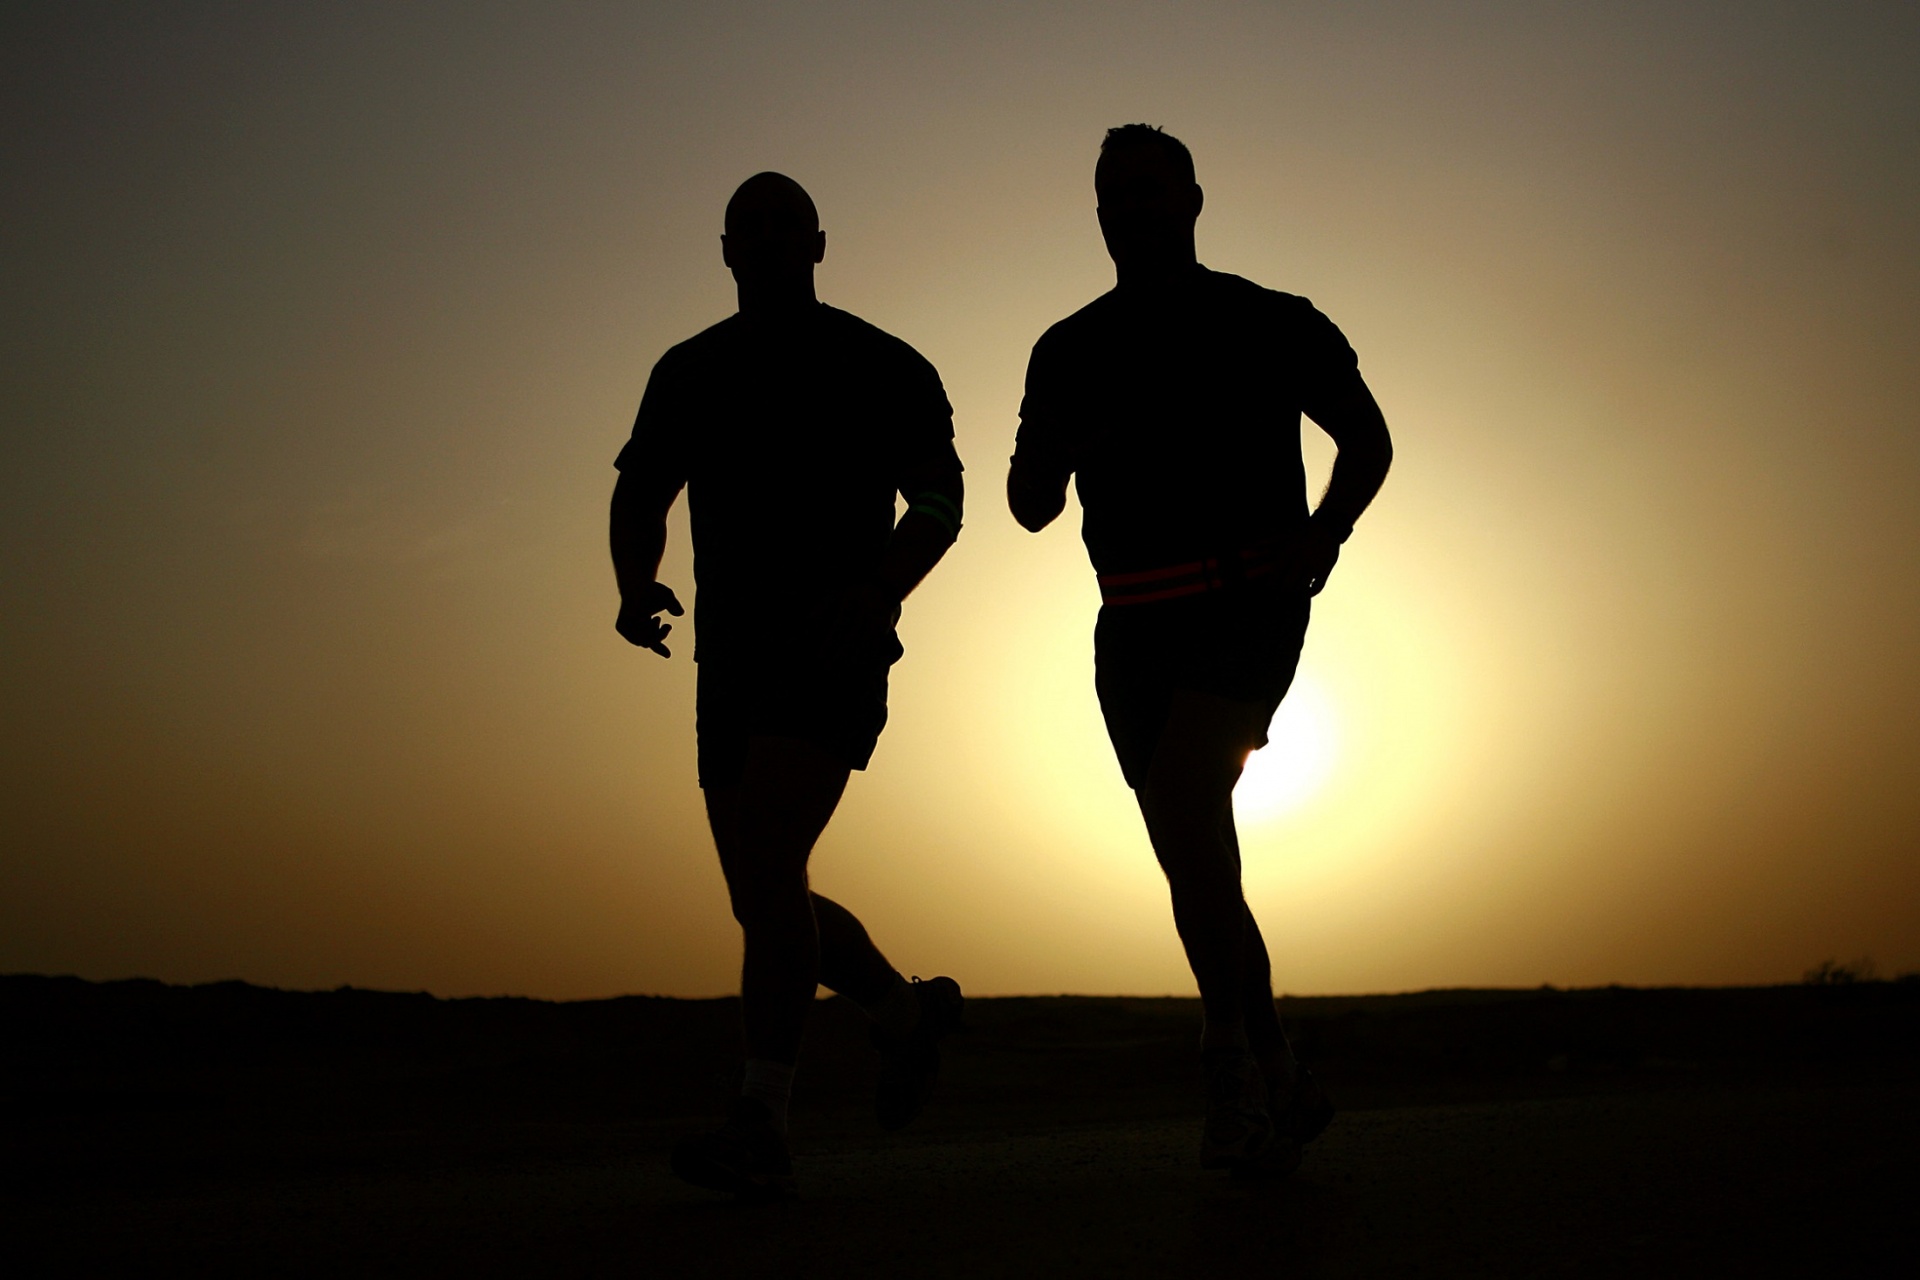 Silhouettes of men jogging at sunset